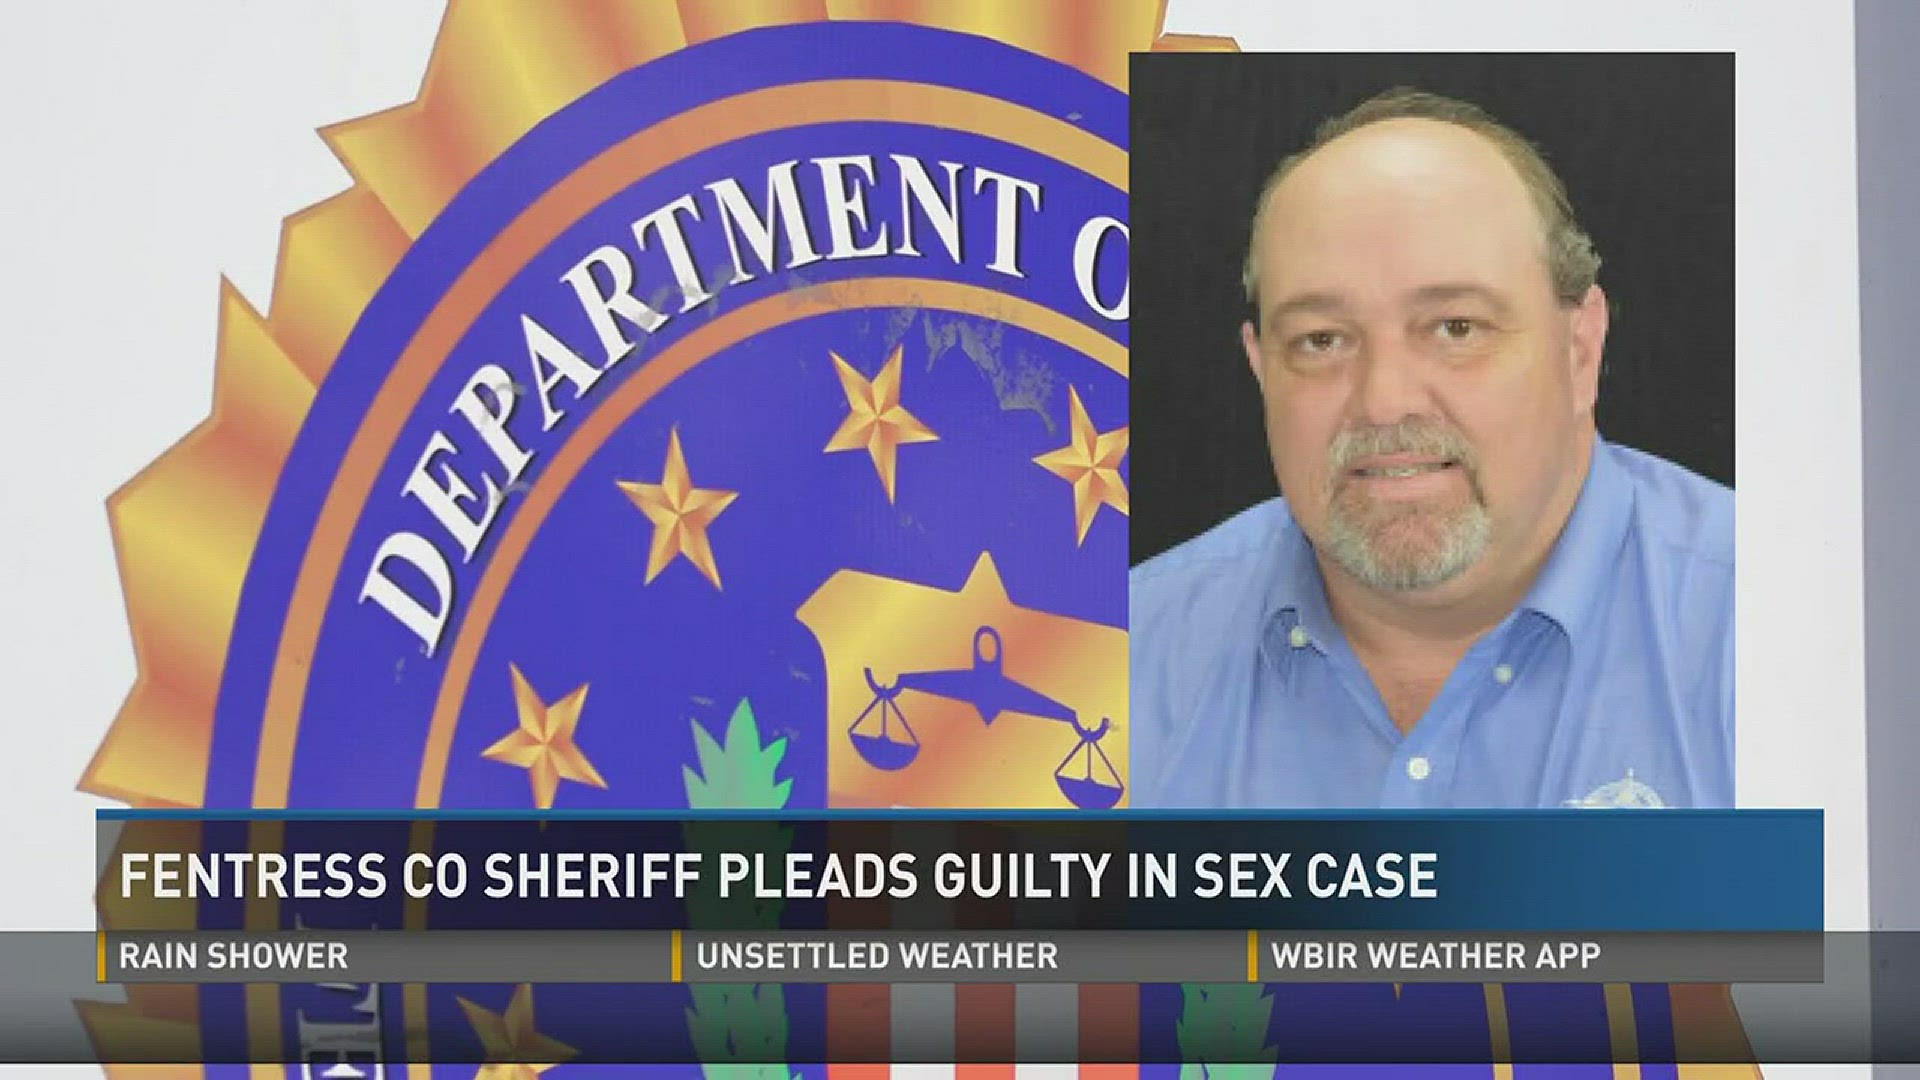 April 20, 2017: The former sheriff of Fentress County has pleaded guilty to bribing several females inmates for favors in exchange for sex and to beating up a male inmate who was handcuffed.